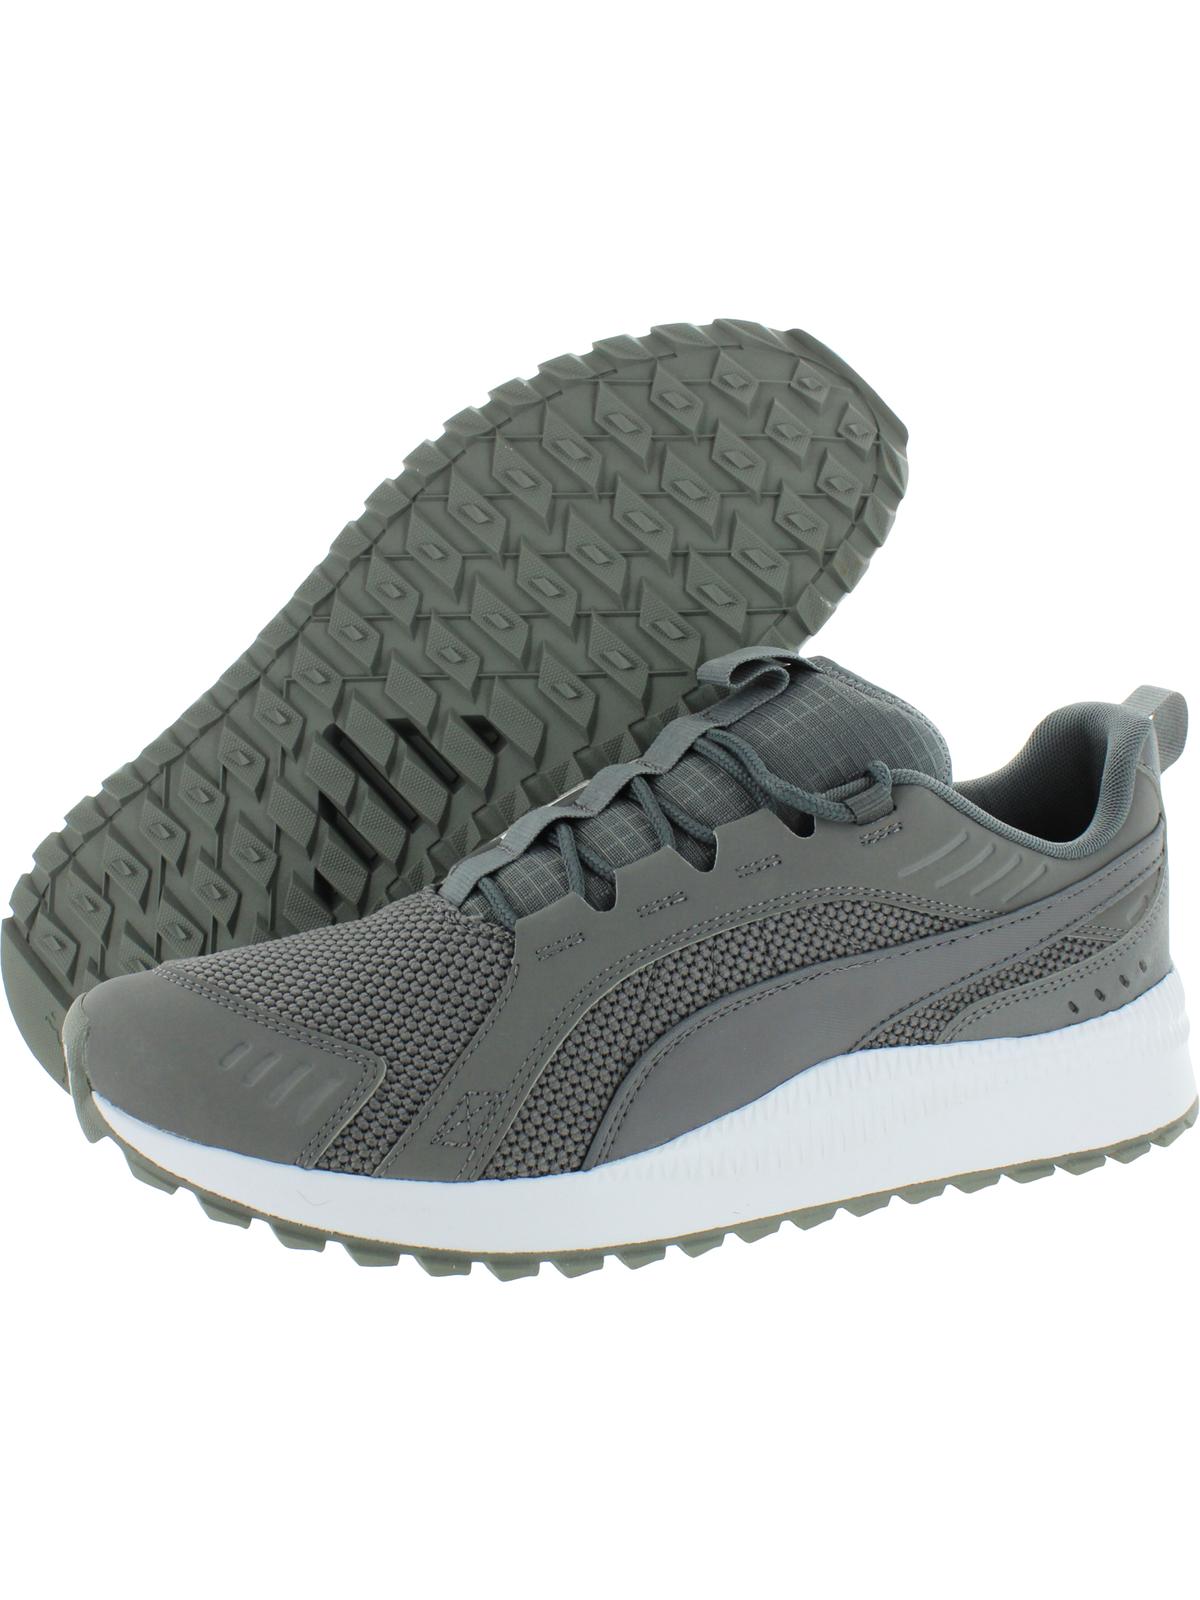 Puma Mens Pacer Next R Fitness Workout Athletic Shoes Gray 12 Medium (D) - image 2 of 2